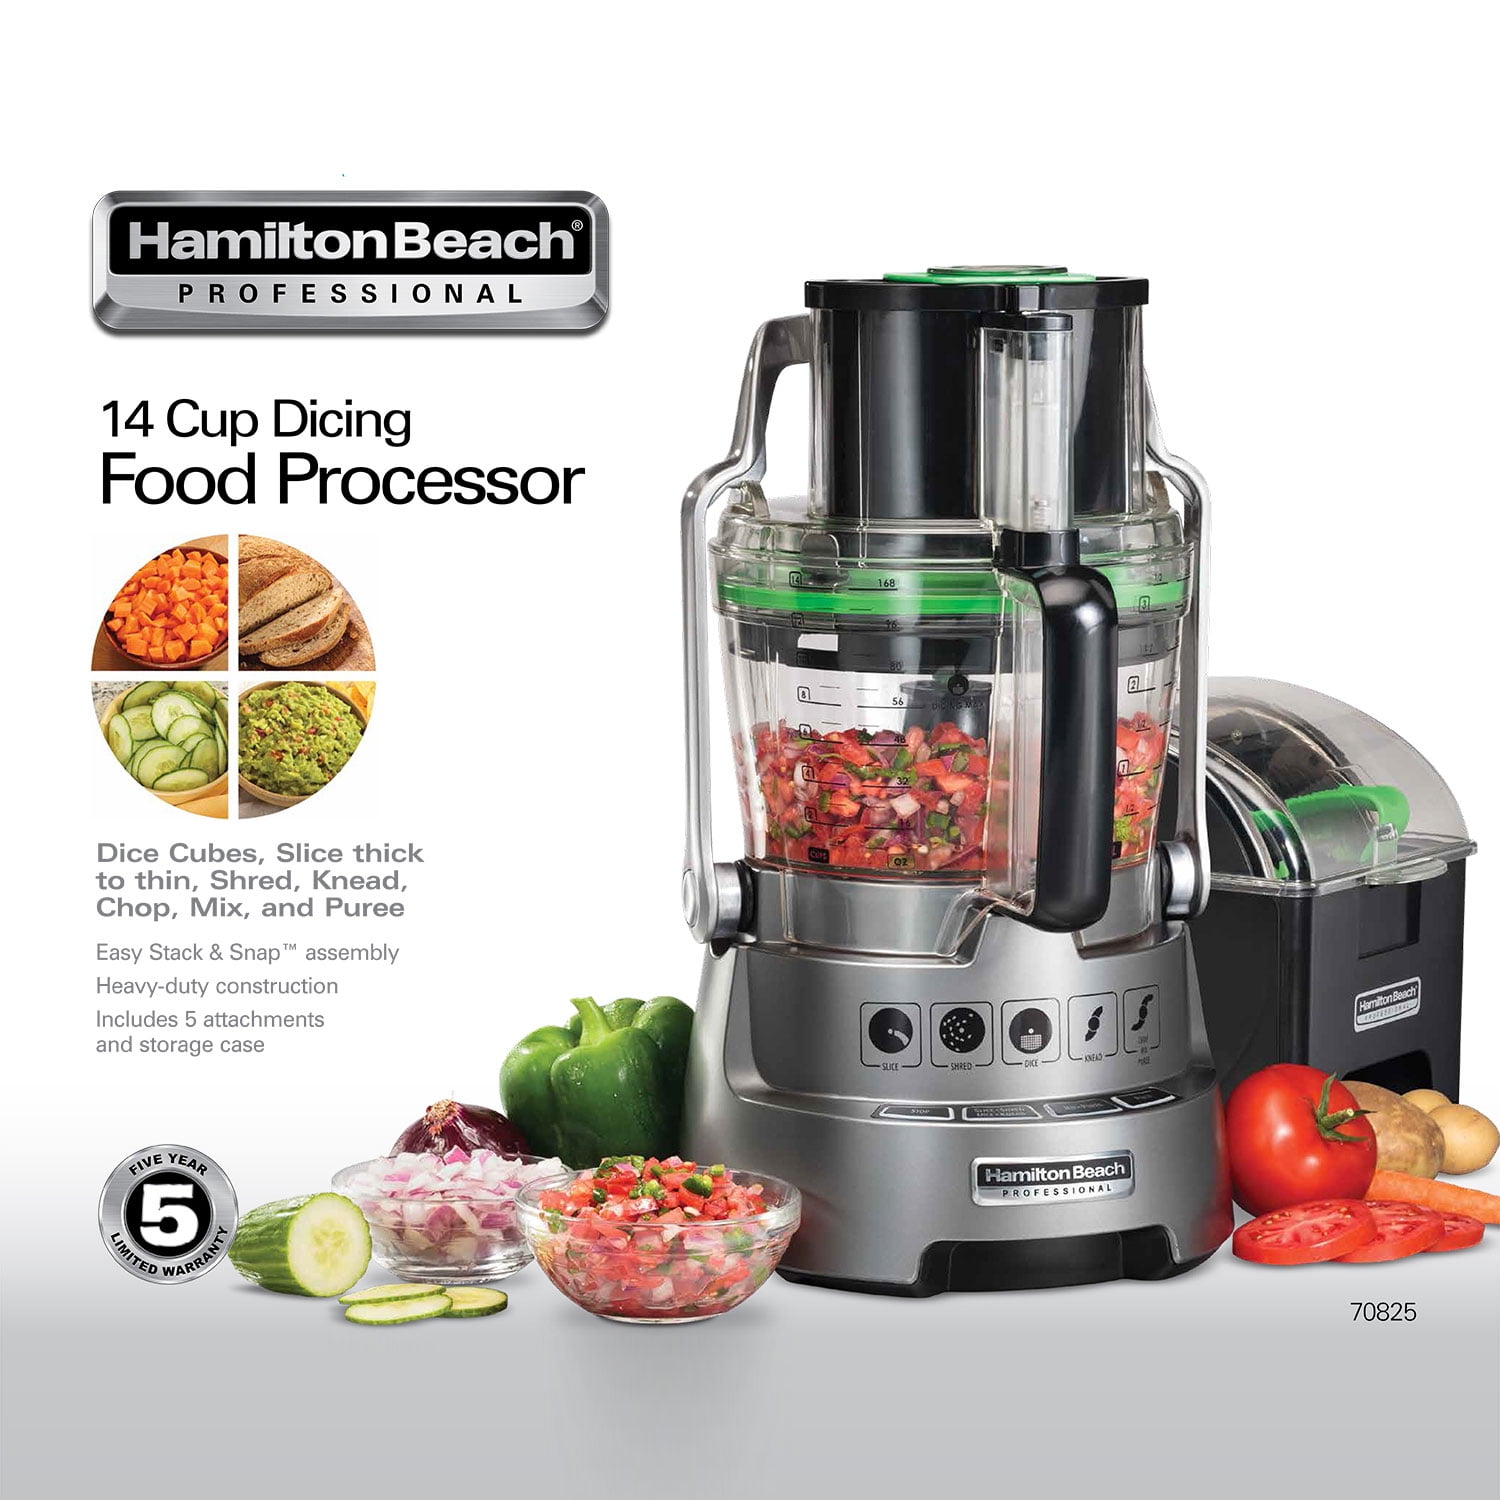 PHILIPS 10-in-1🌪️SOUP+SMOOTHIE MAKER🌪️4-CUPS CAPACITY❣️ - household items  - by owner - housewares sale - craigslist